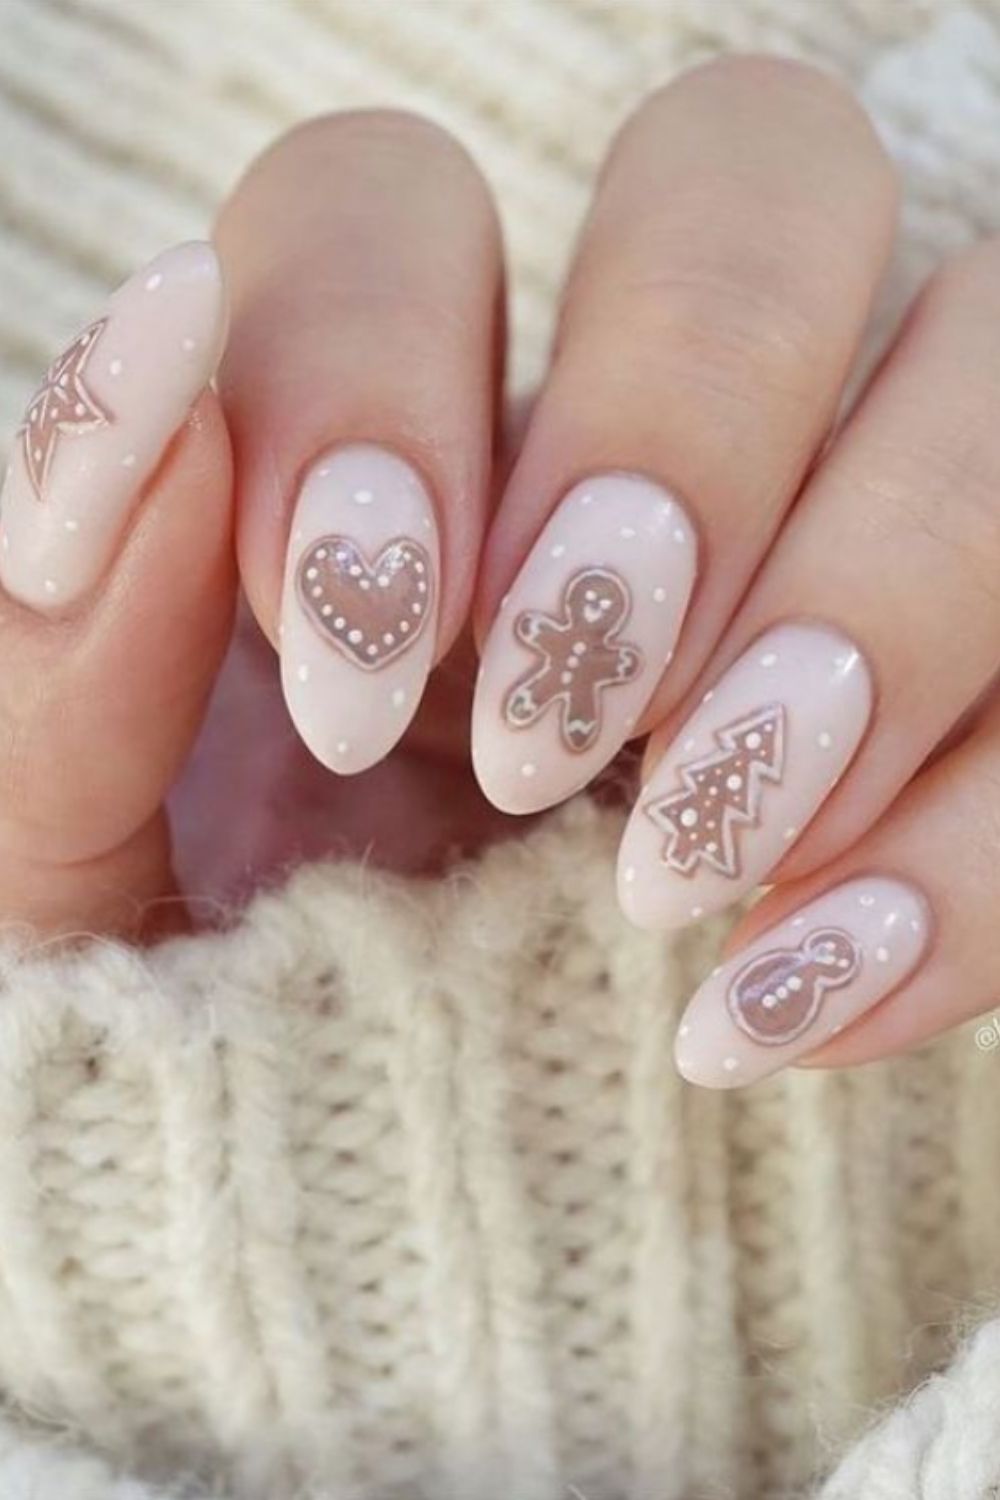 Pink and white almond nails designs with heart and christmas tree